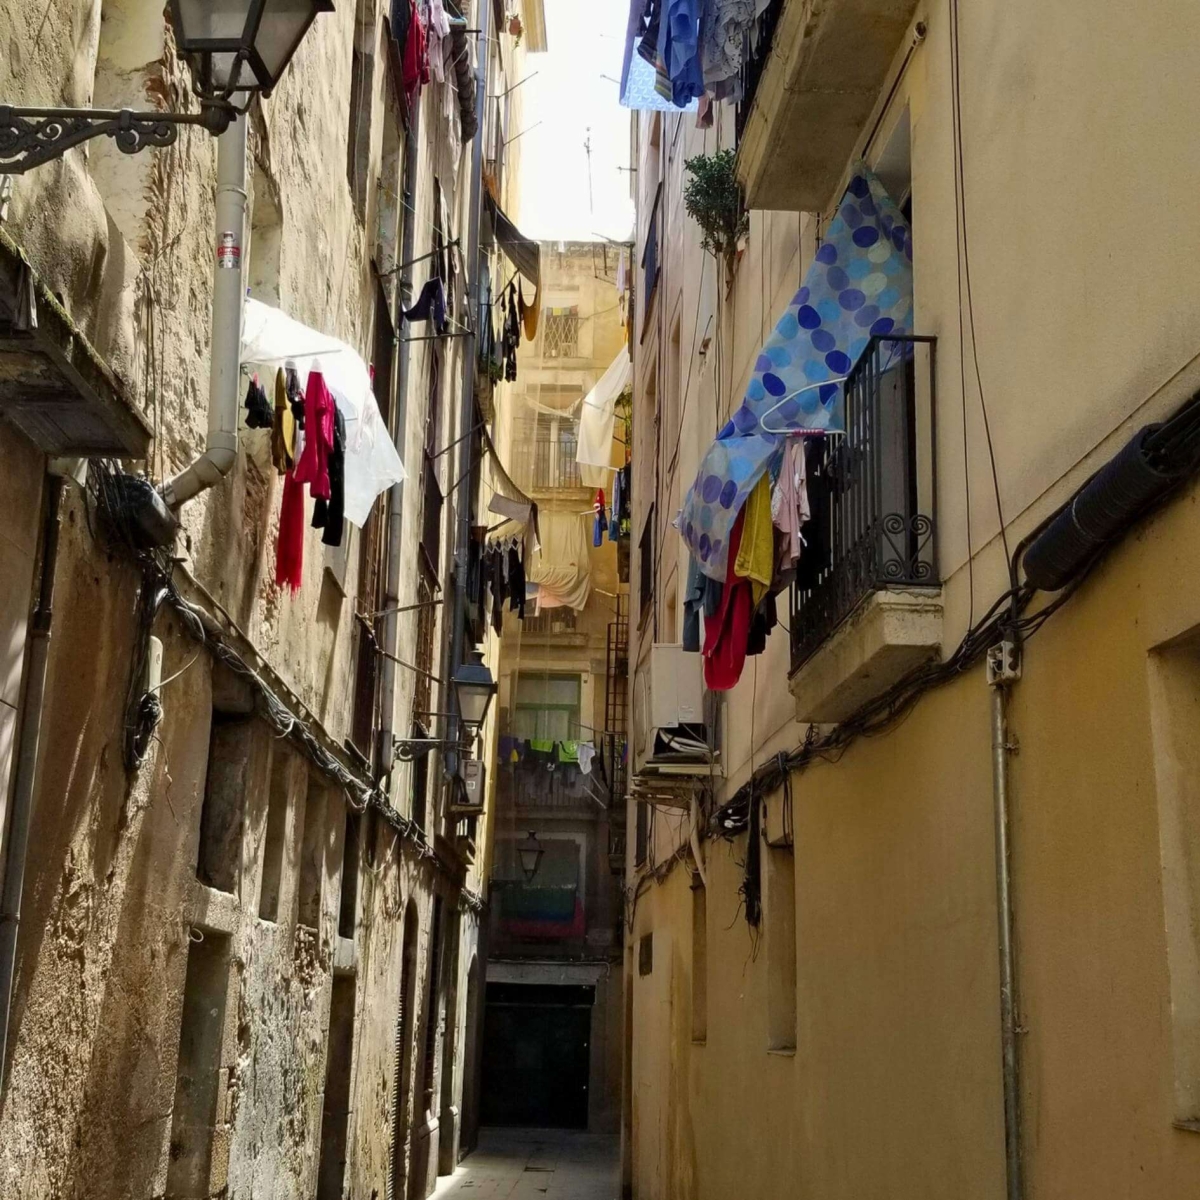 A narrow street in Barcelona, porches with laundry drying